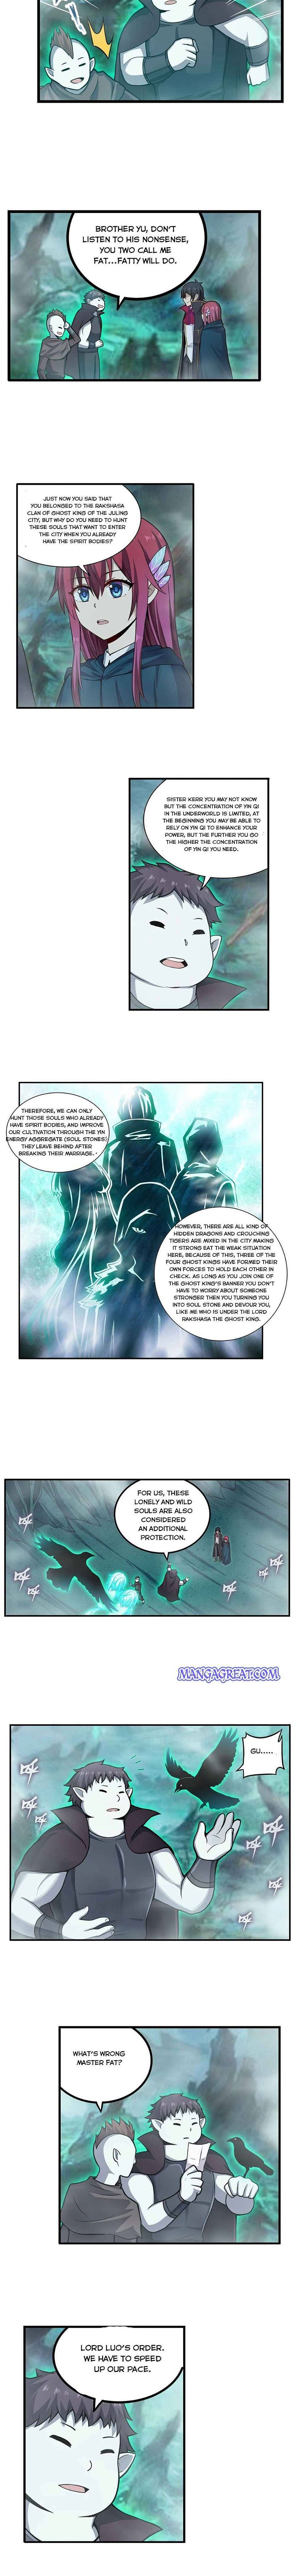 Infinite Apostles and Twelve War Girls Chapter 191 page 2